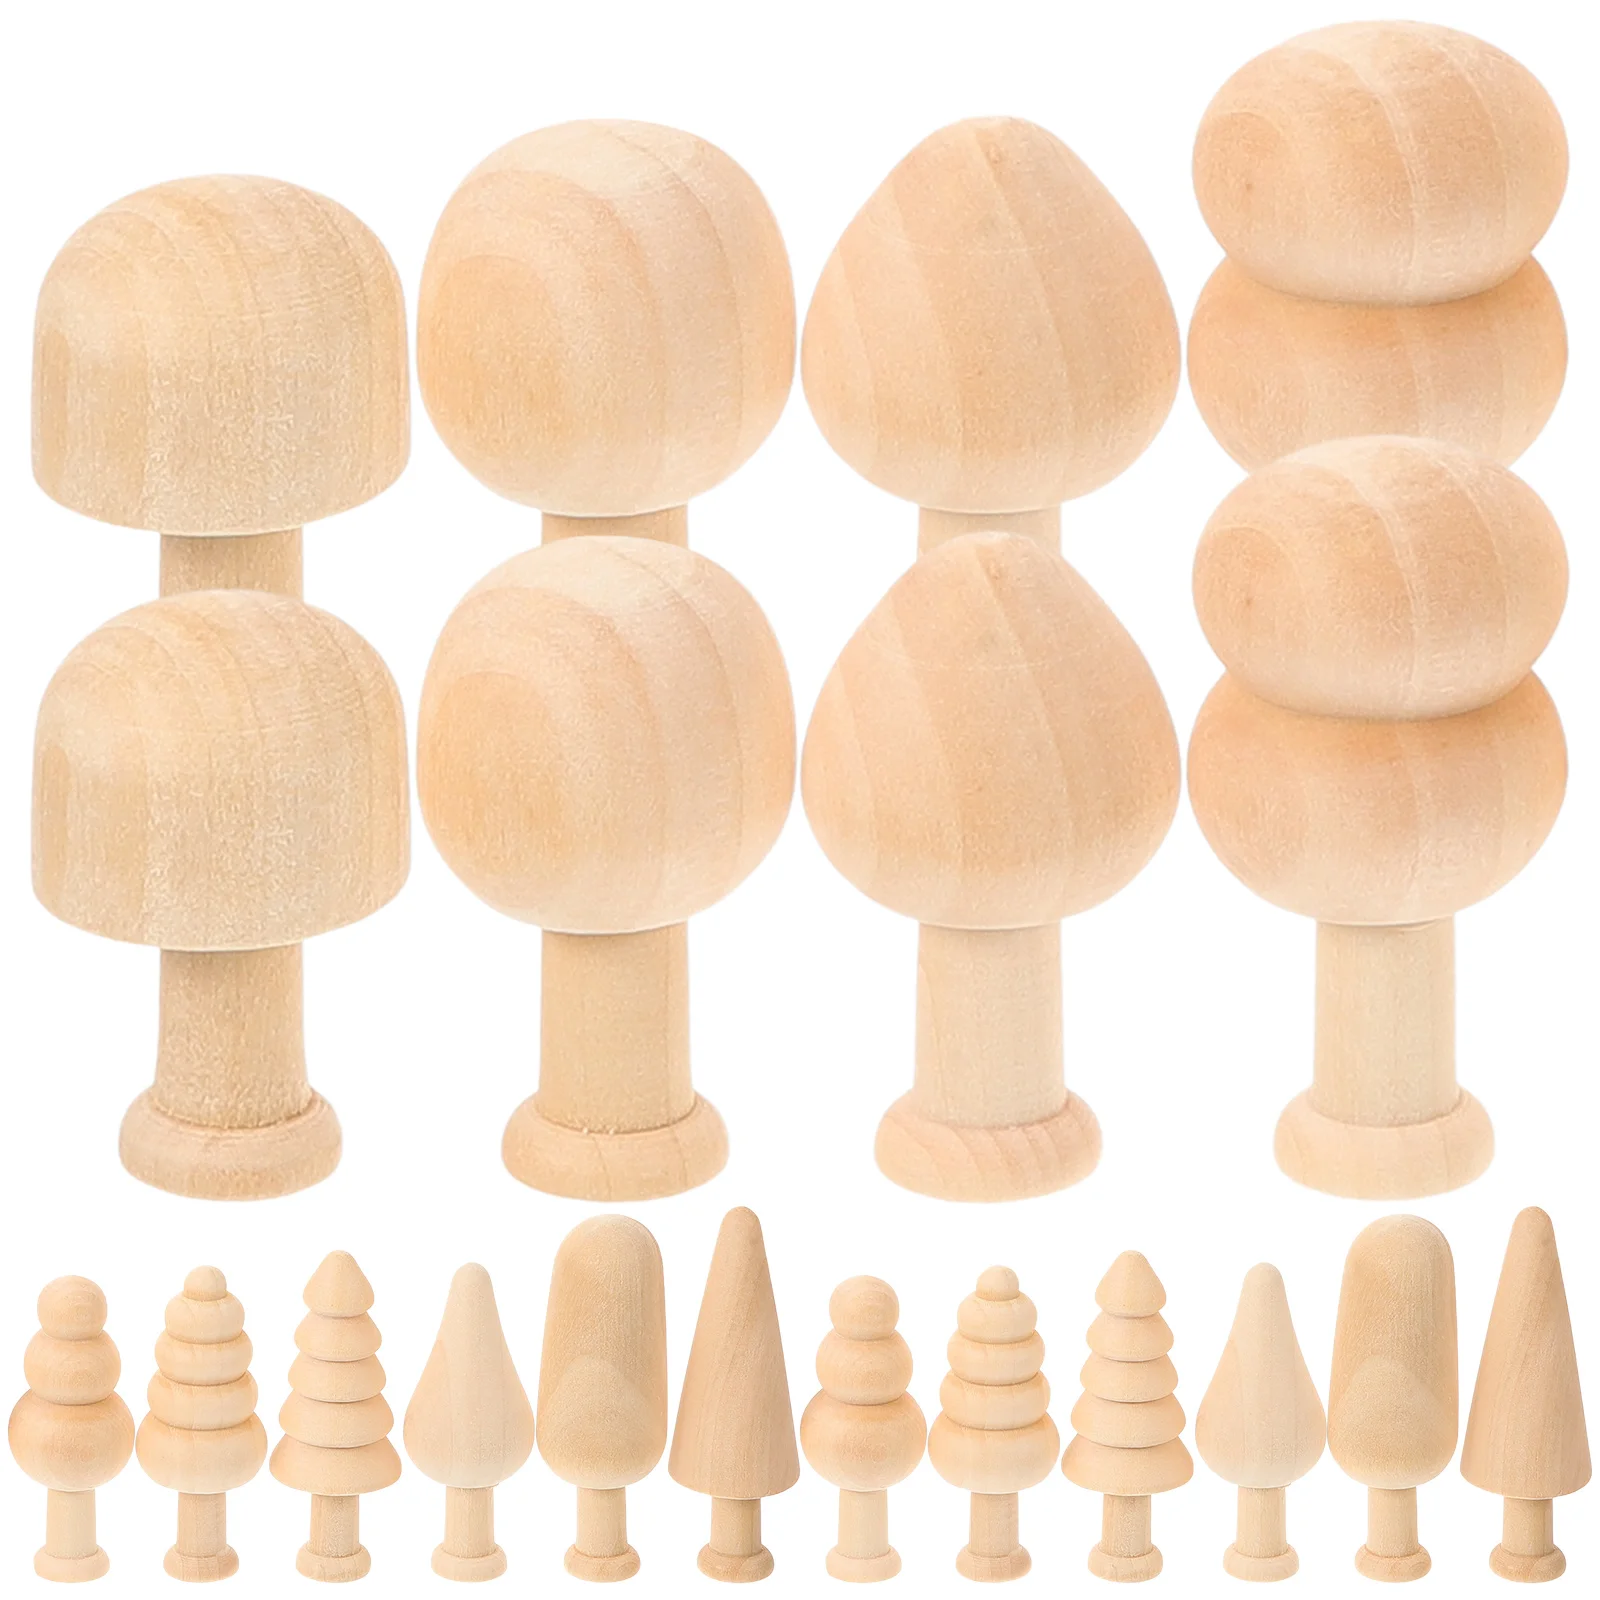 

English title: Unfinished Wood Christmas Tree Wooden Peg Doll Wooden Tree Toy Christmas Crafts Mini Wooden Mushrooms Paint Mini